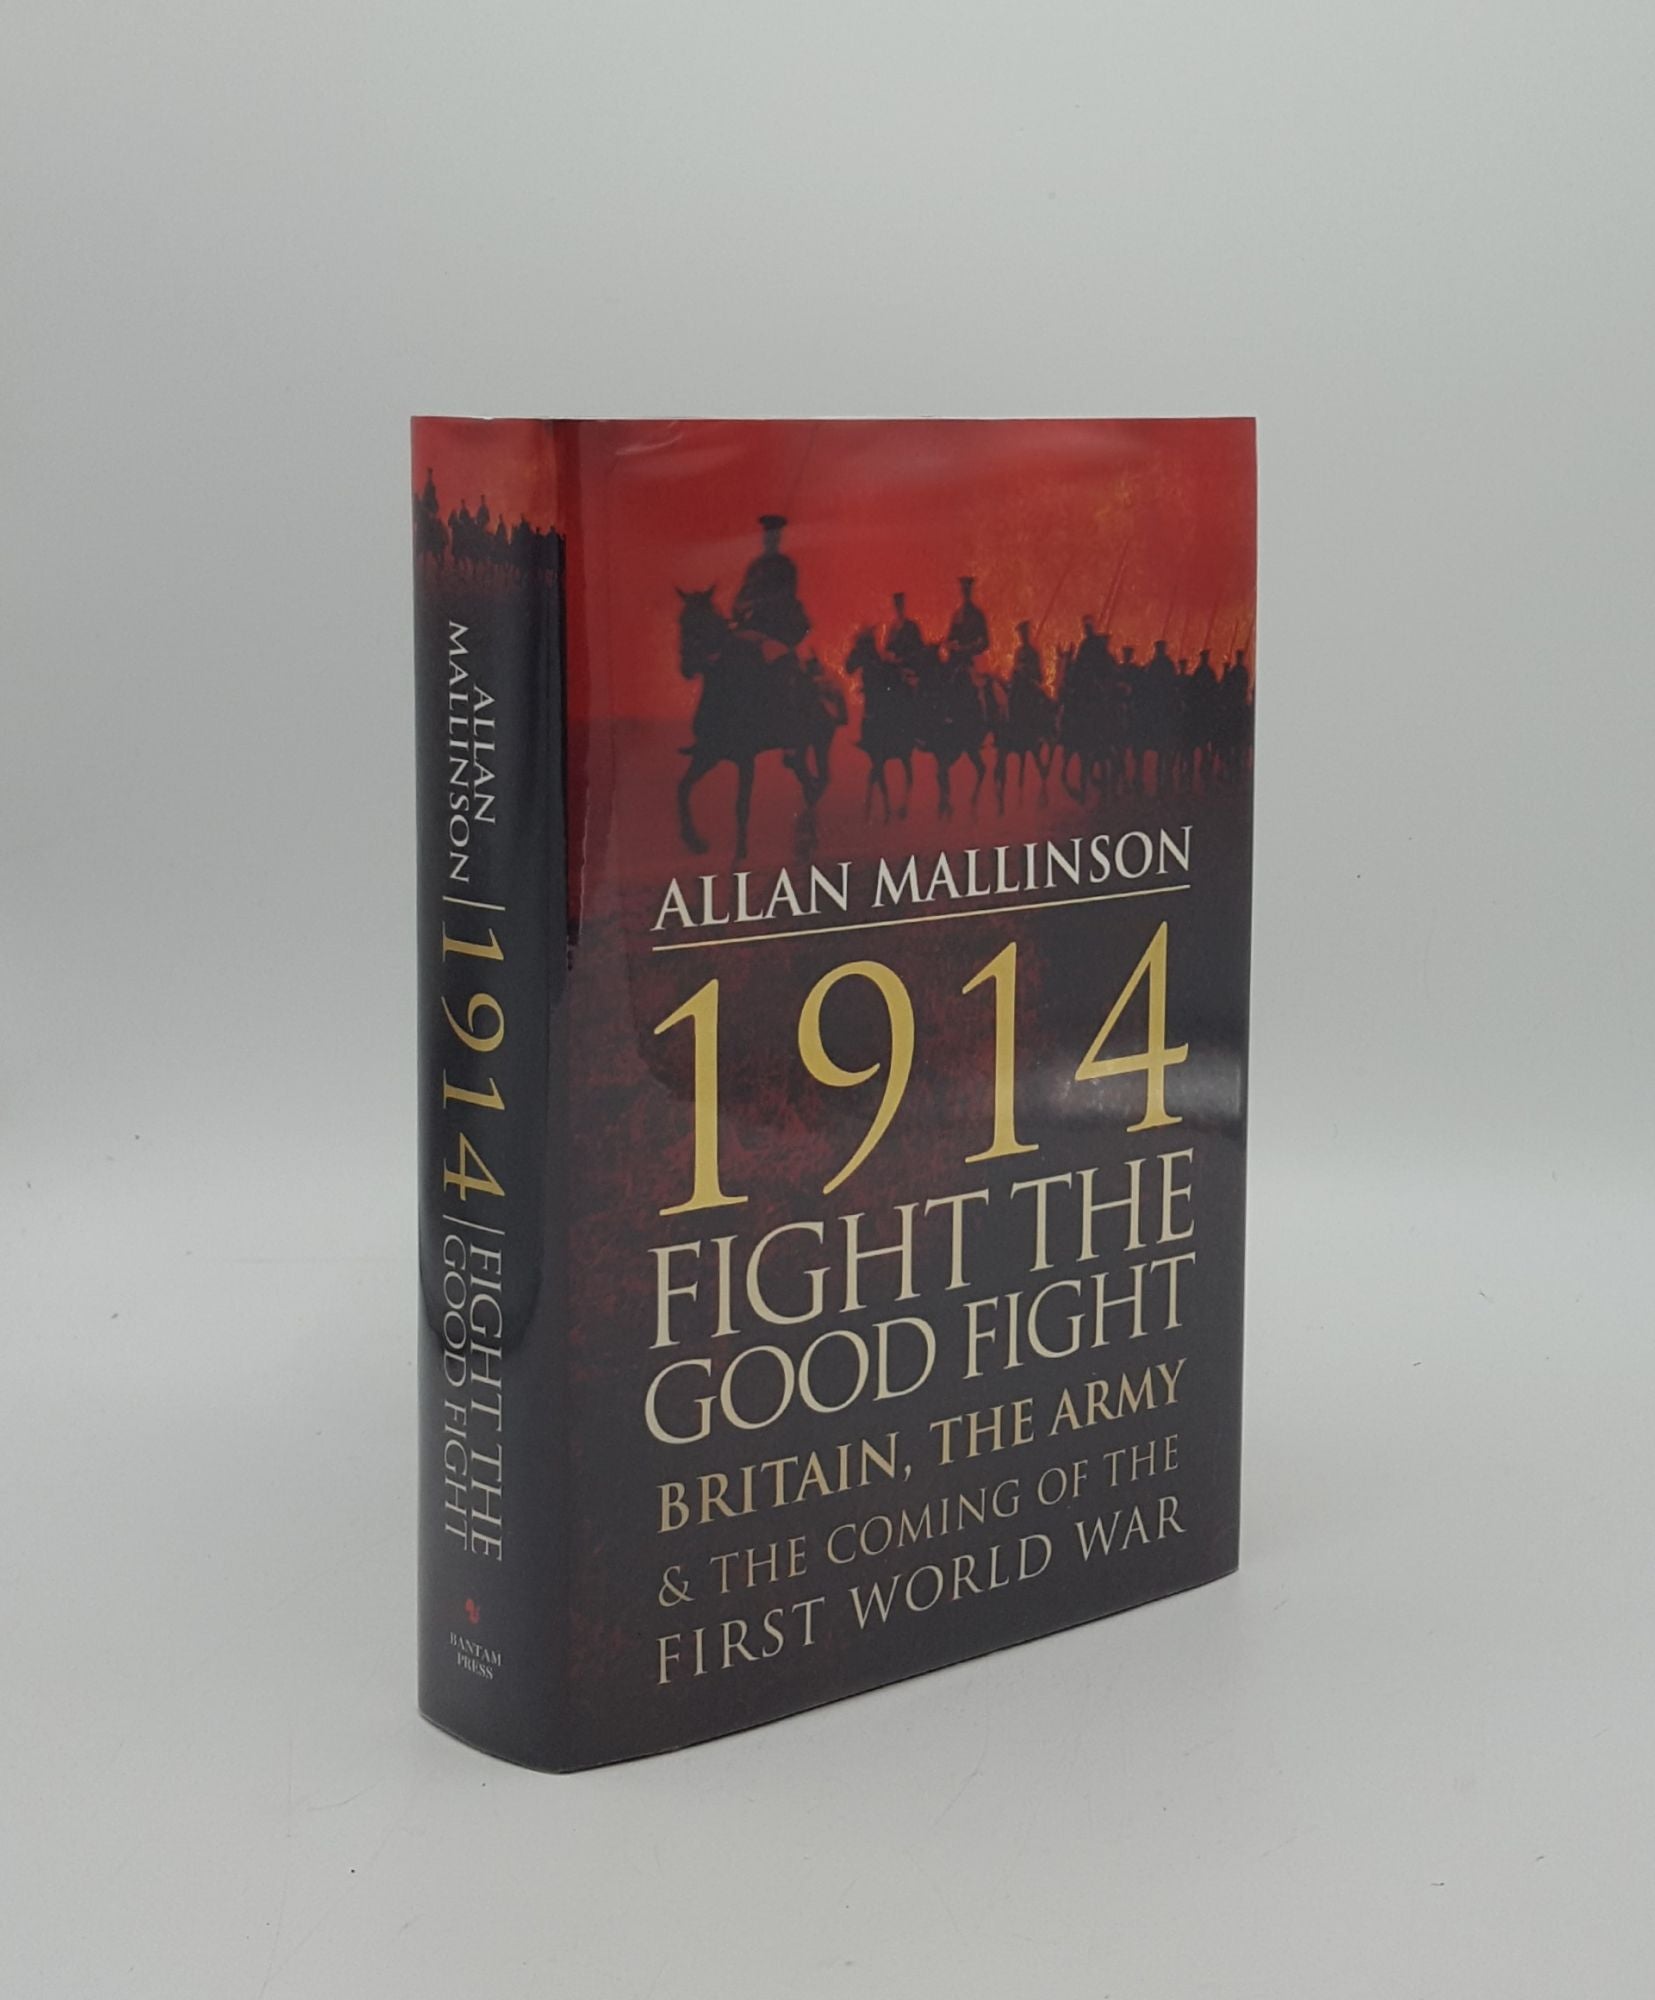 MALLINSON Allan - 1914 Fight the Good Fight Britain the Army and the Coming of the First World War